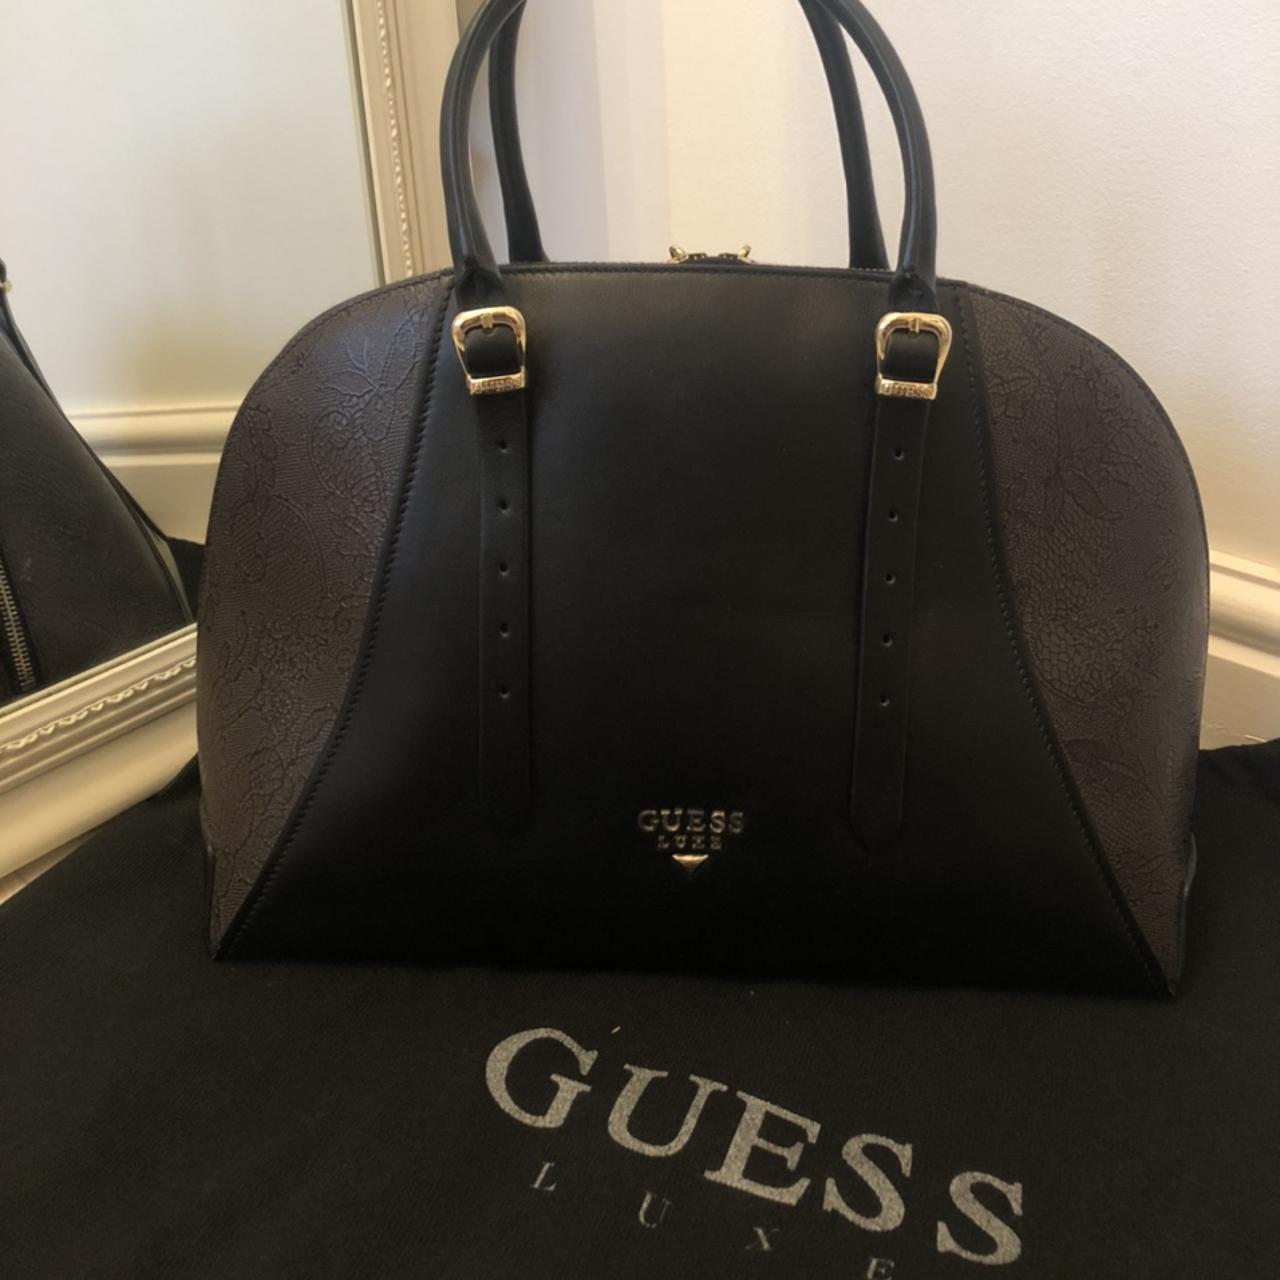 GUESS - The new #GUESS Luxe Margot leather bag is available